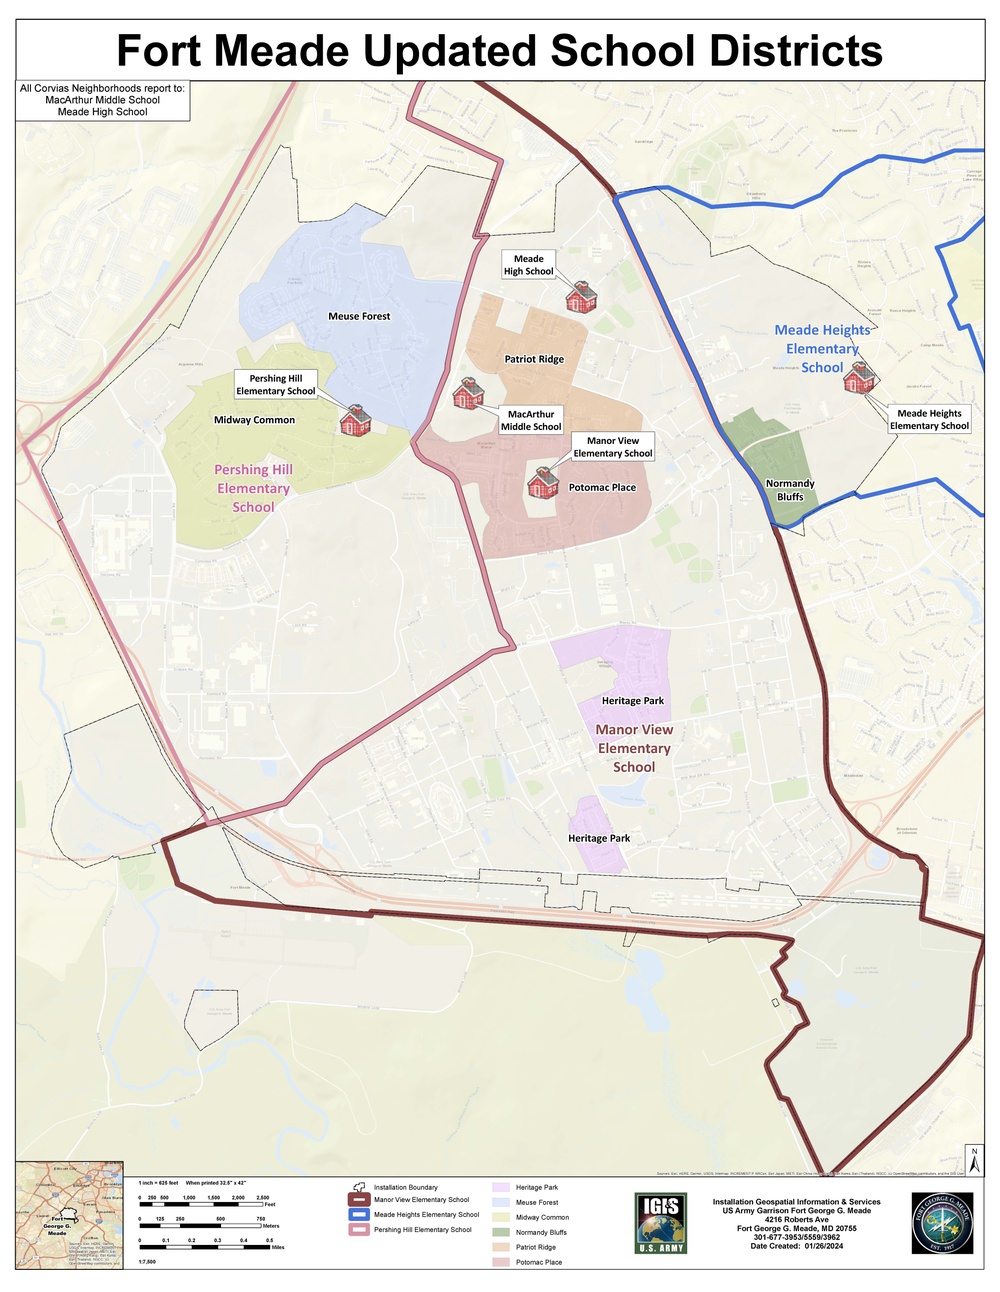 AACPS Redistricting Plan: Fort Meade Community Faces Changes in Upcoming School Year